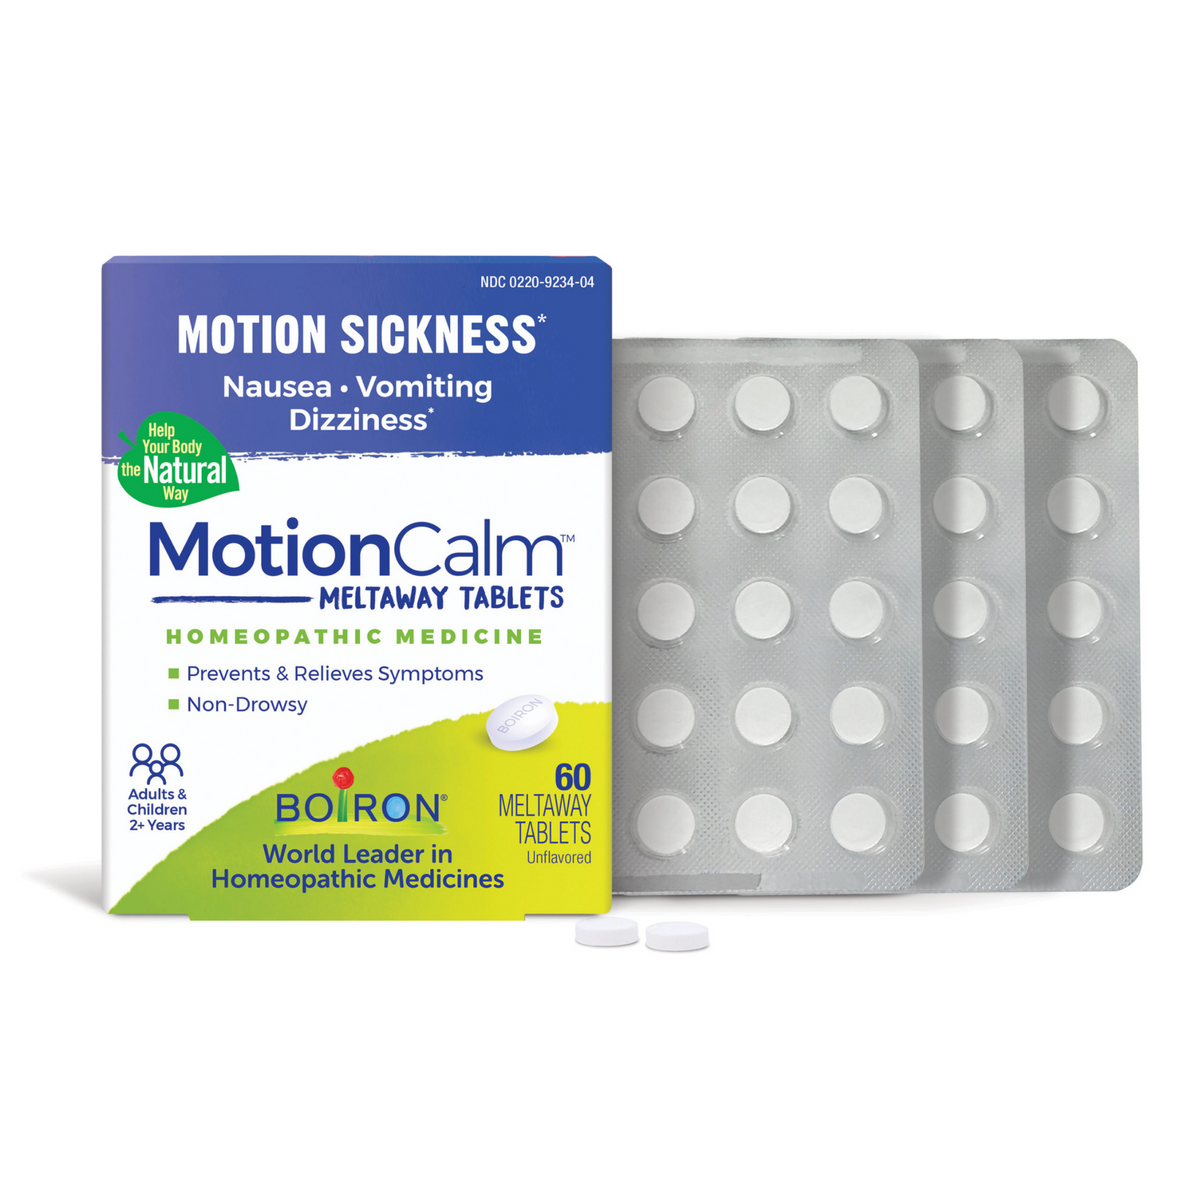 Boiron MotionCalm Meltaway Tablets (60 count) #10084682